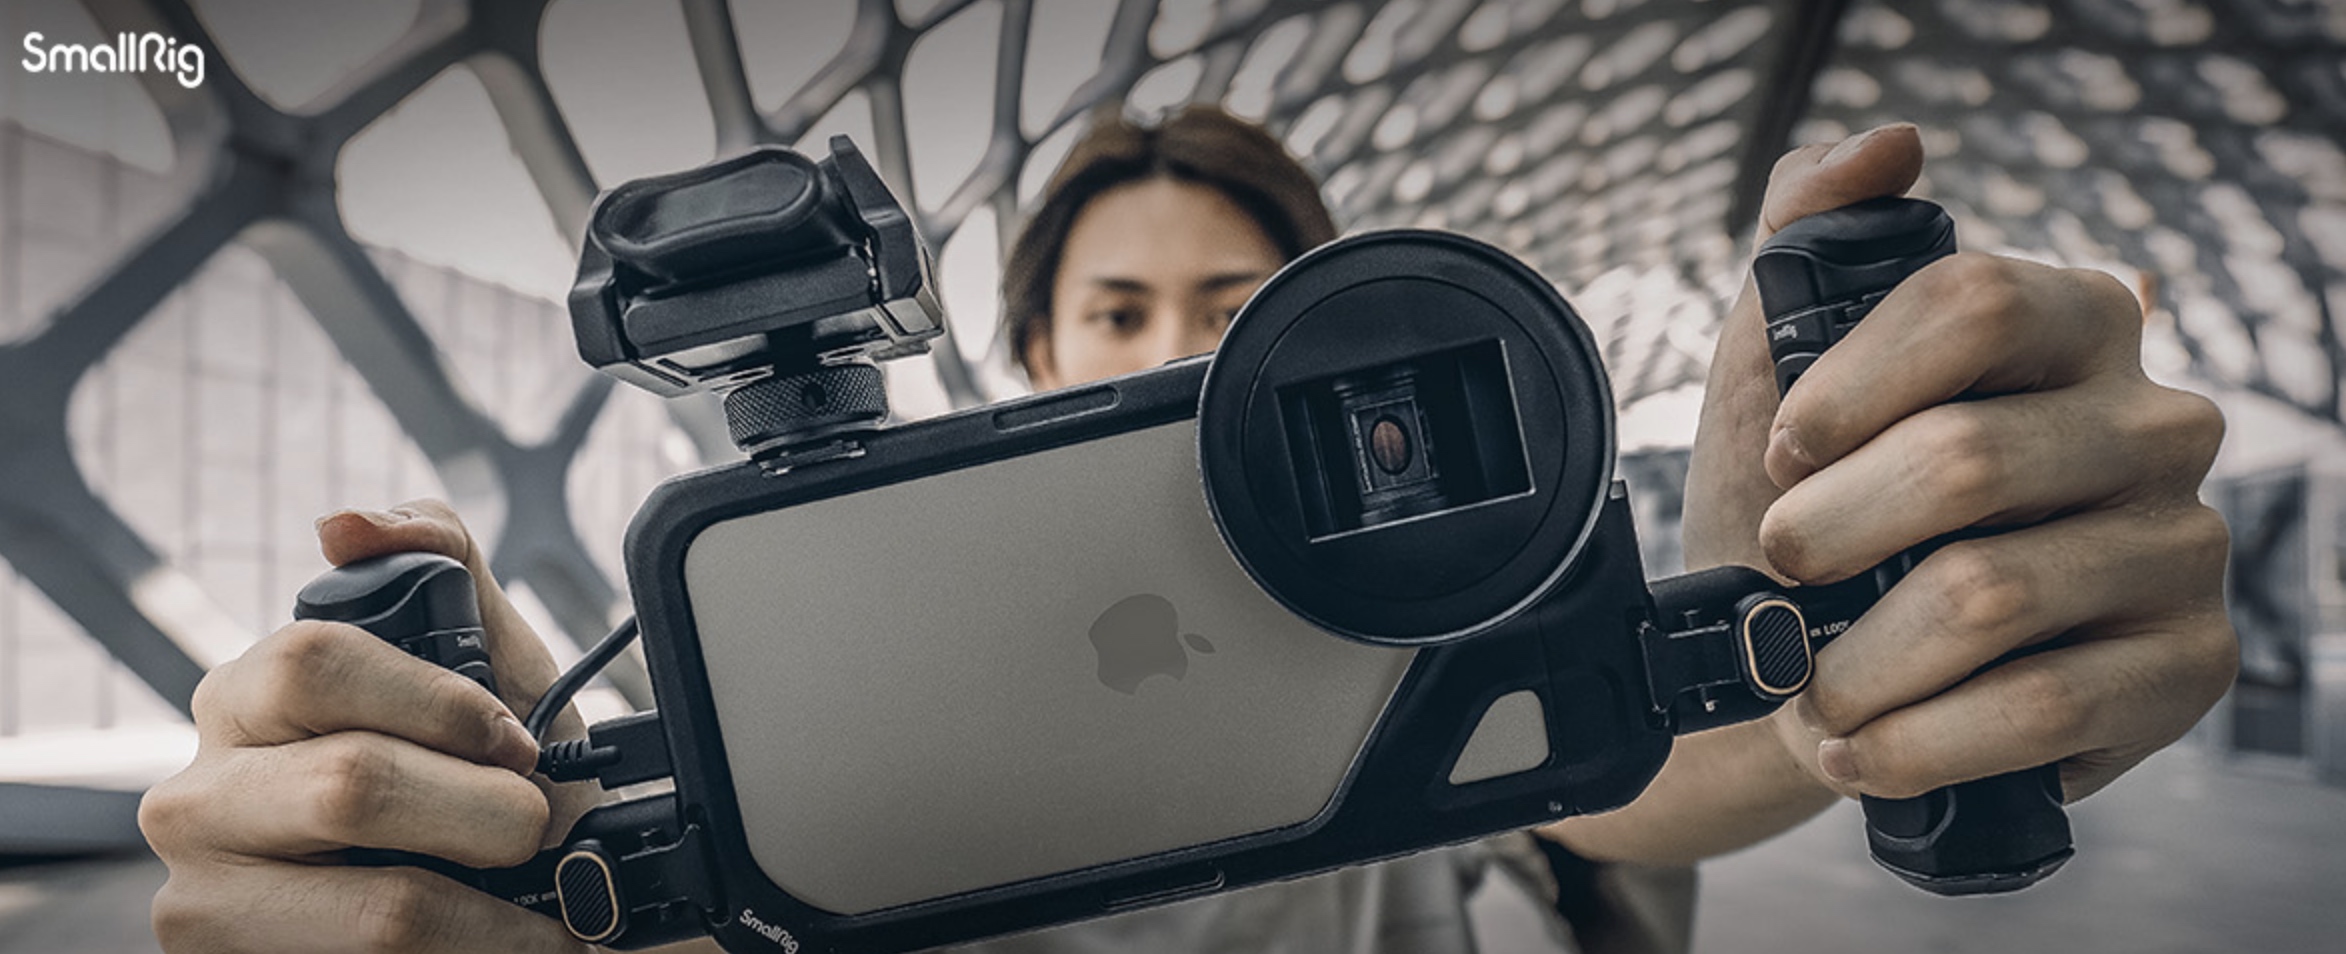 SmallRig Special Edition Mobile Cage kit for the iPhone 15 Pro Max Review -  Newsshooter